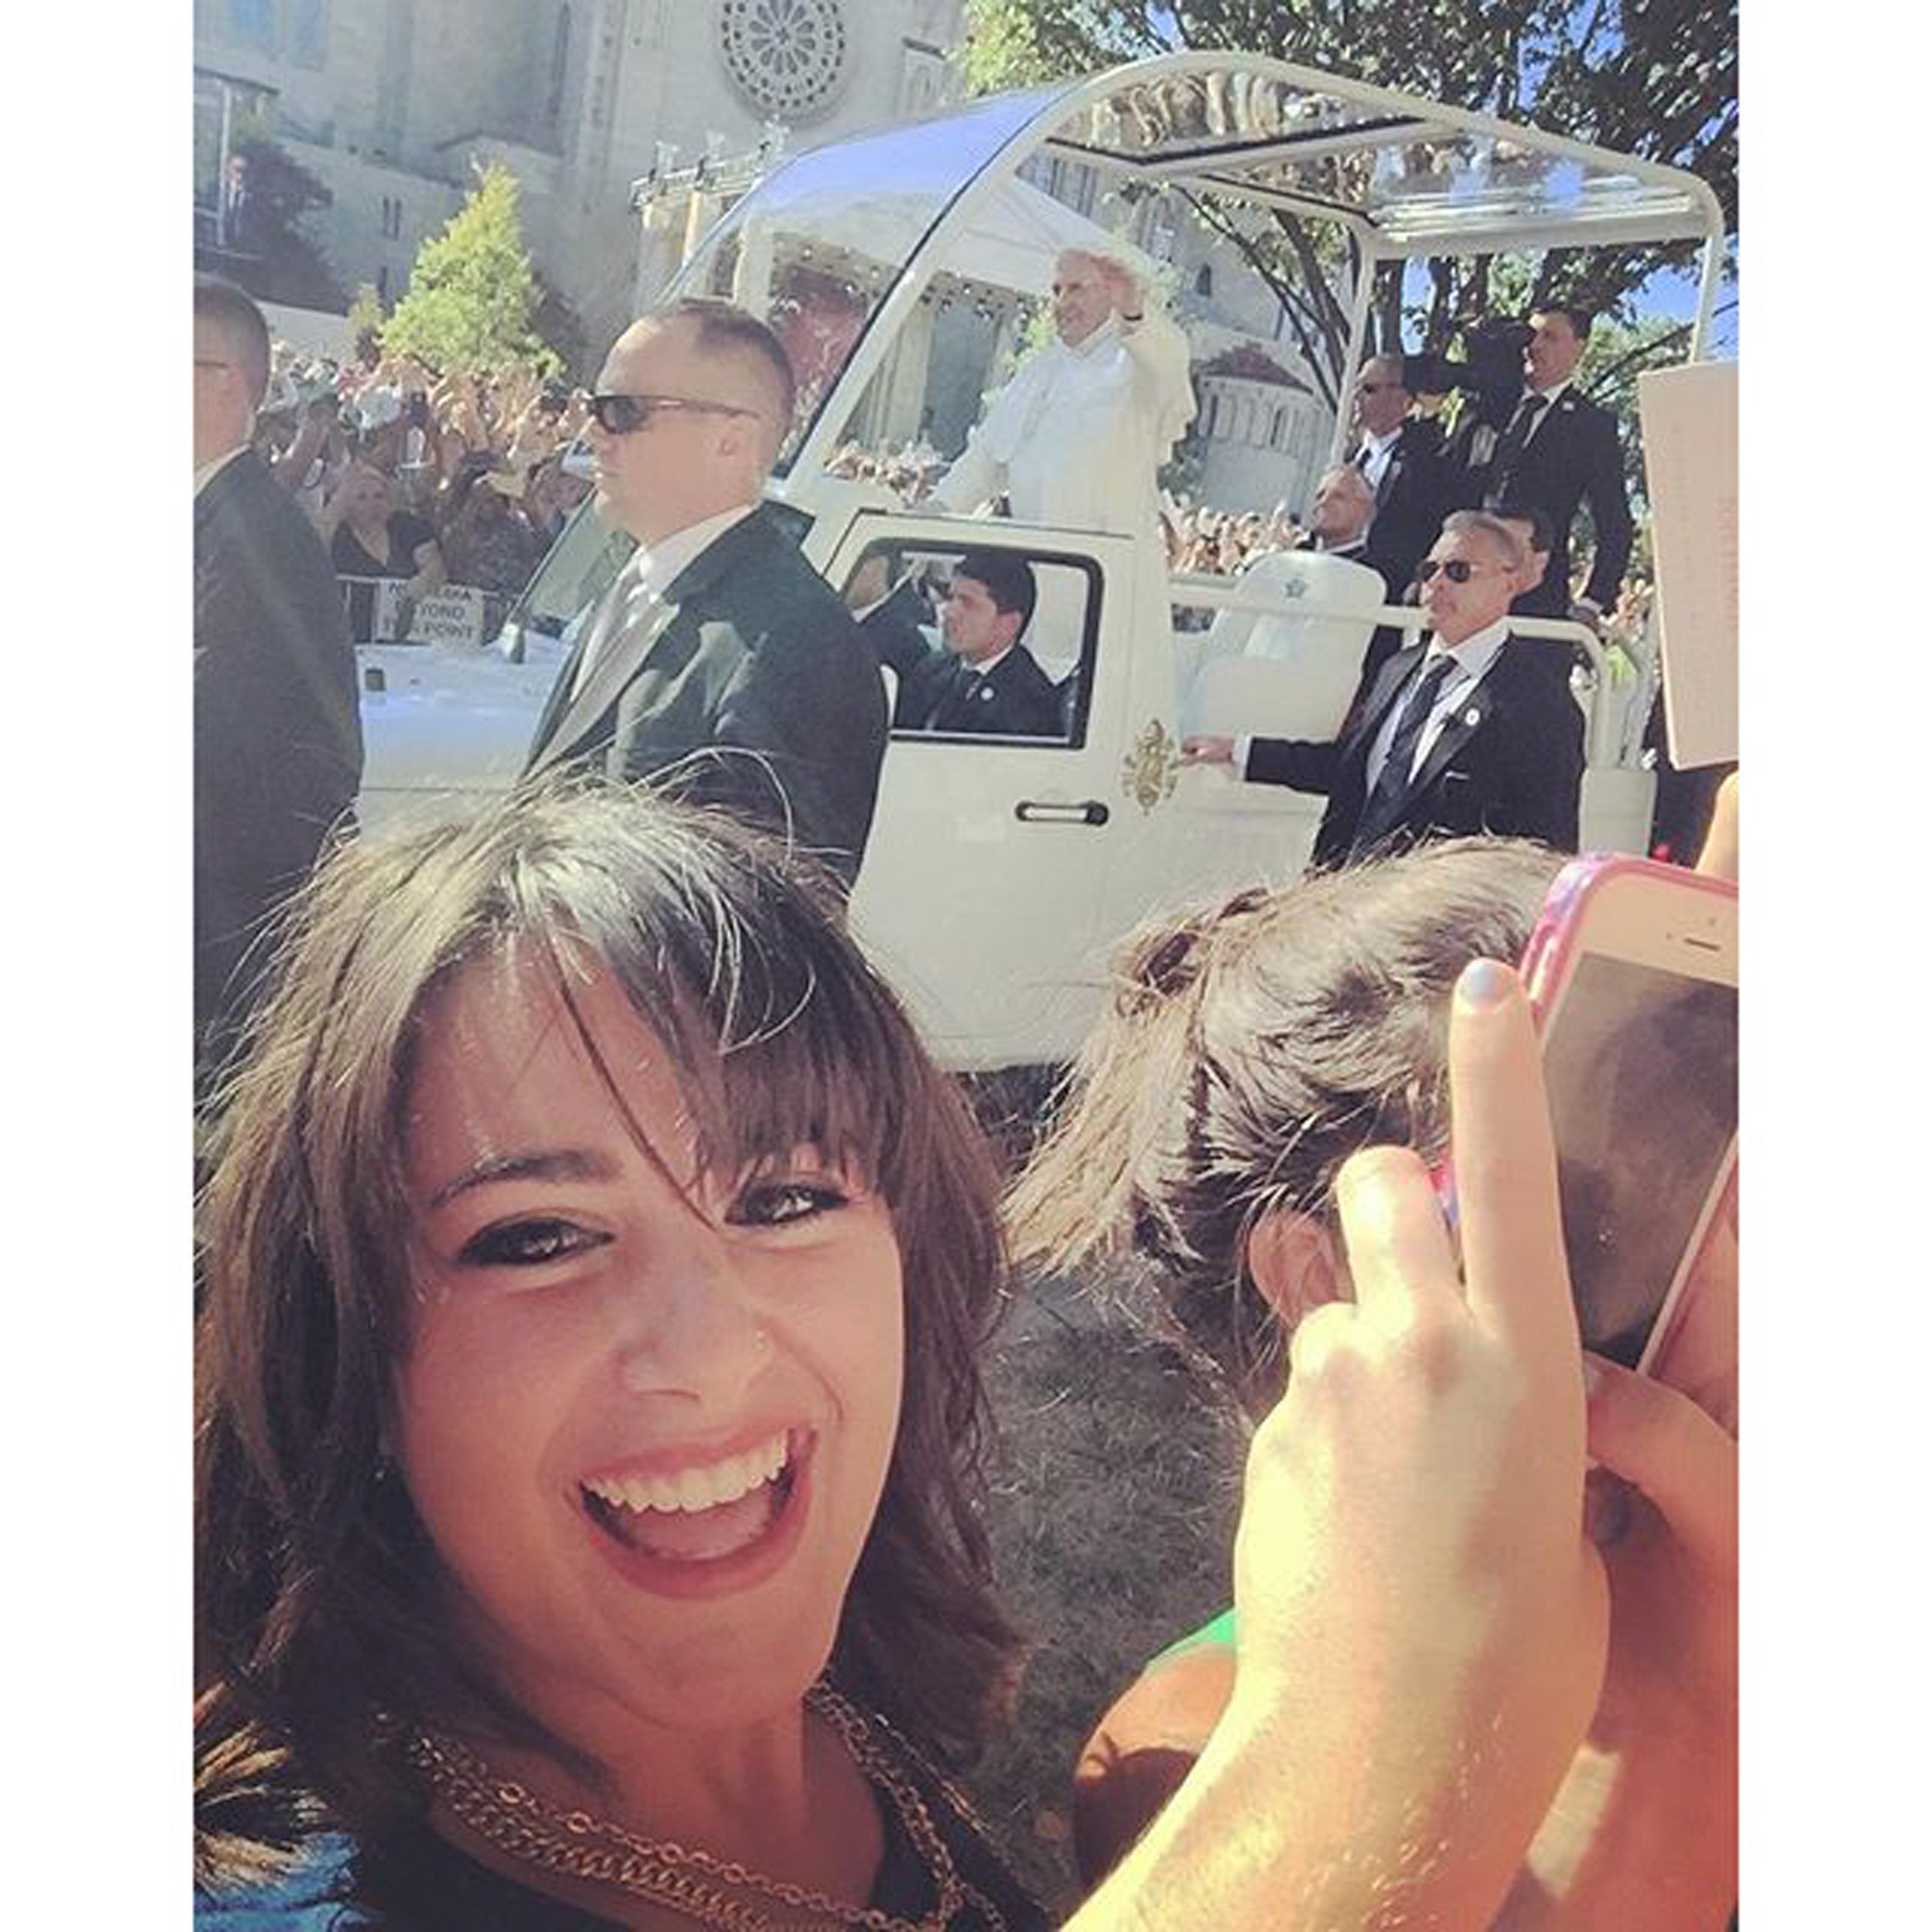 Erica Lynn P. posted from Washington, D.C., saying  I took a selfie with Papa Francesco. What did you do today?